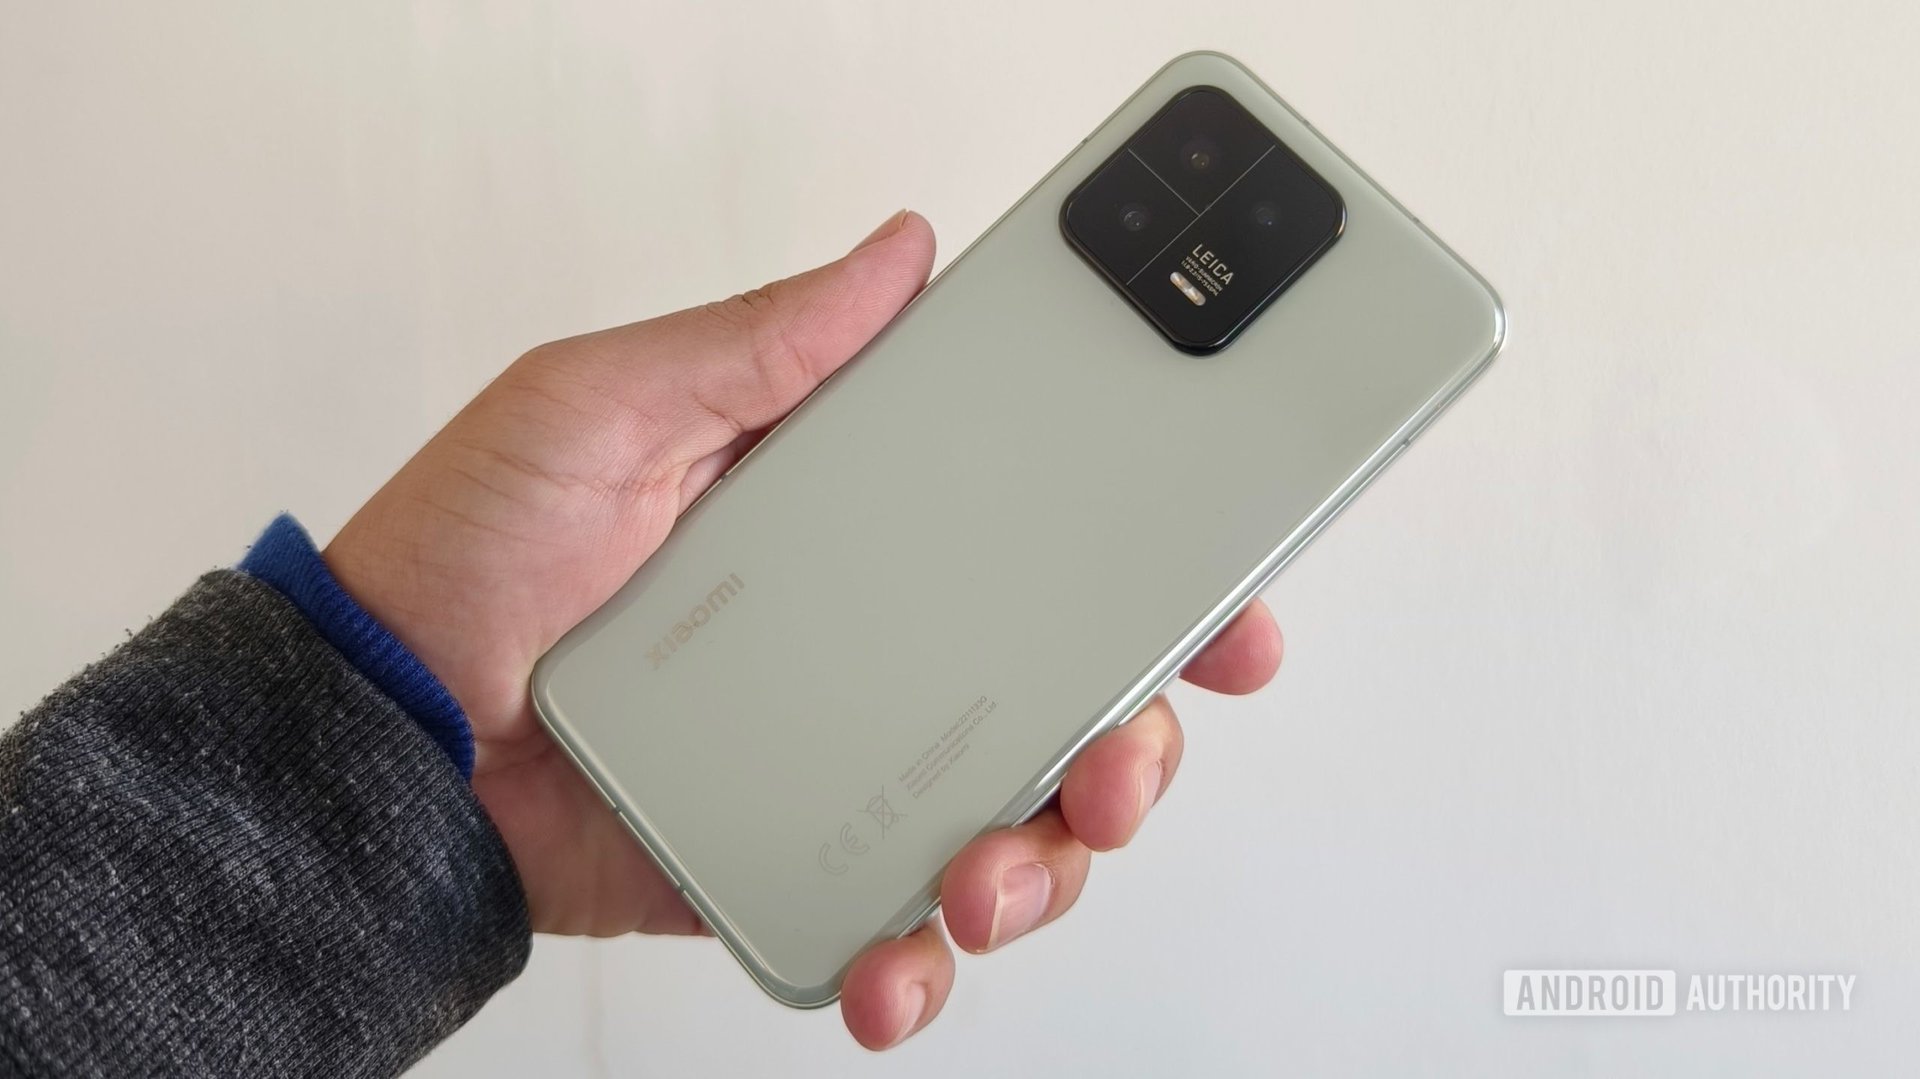 Xiaomi 12 series buyer's guide: Everything you need to know